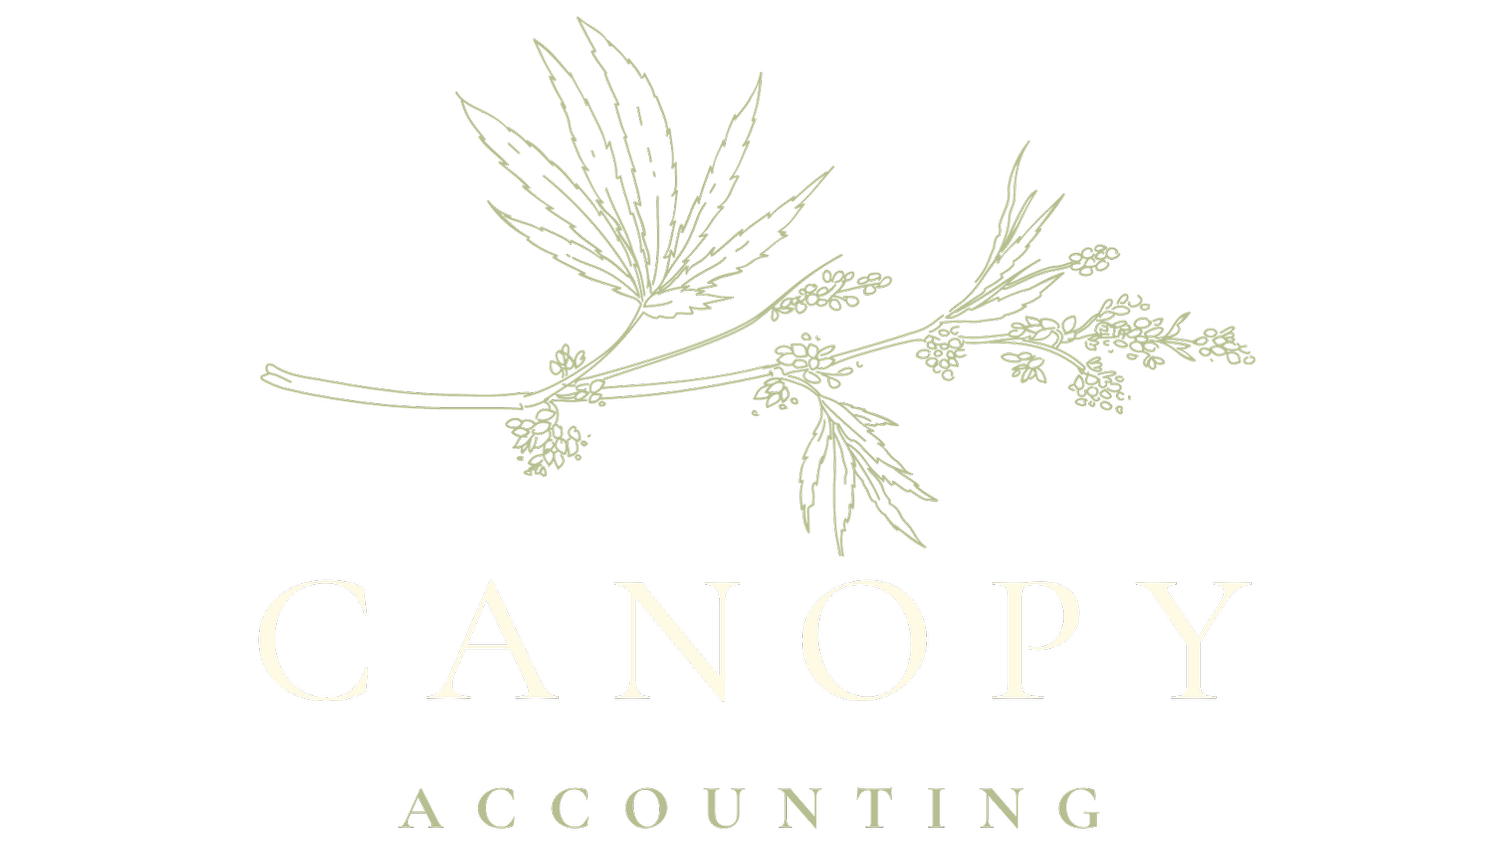 Canopy Accounting